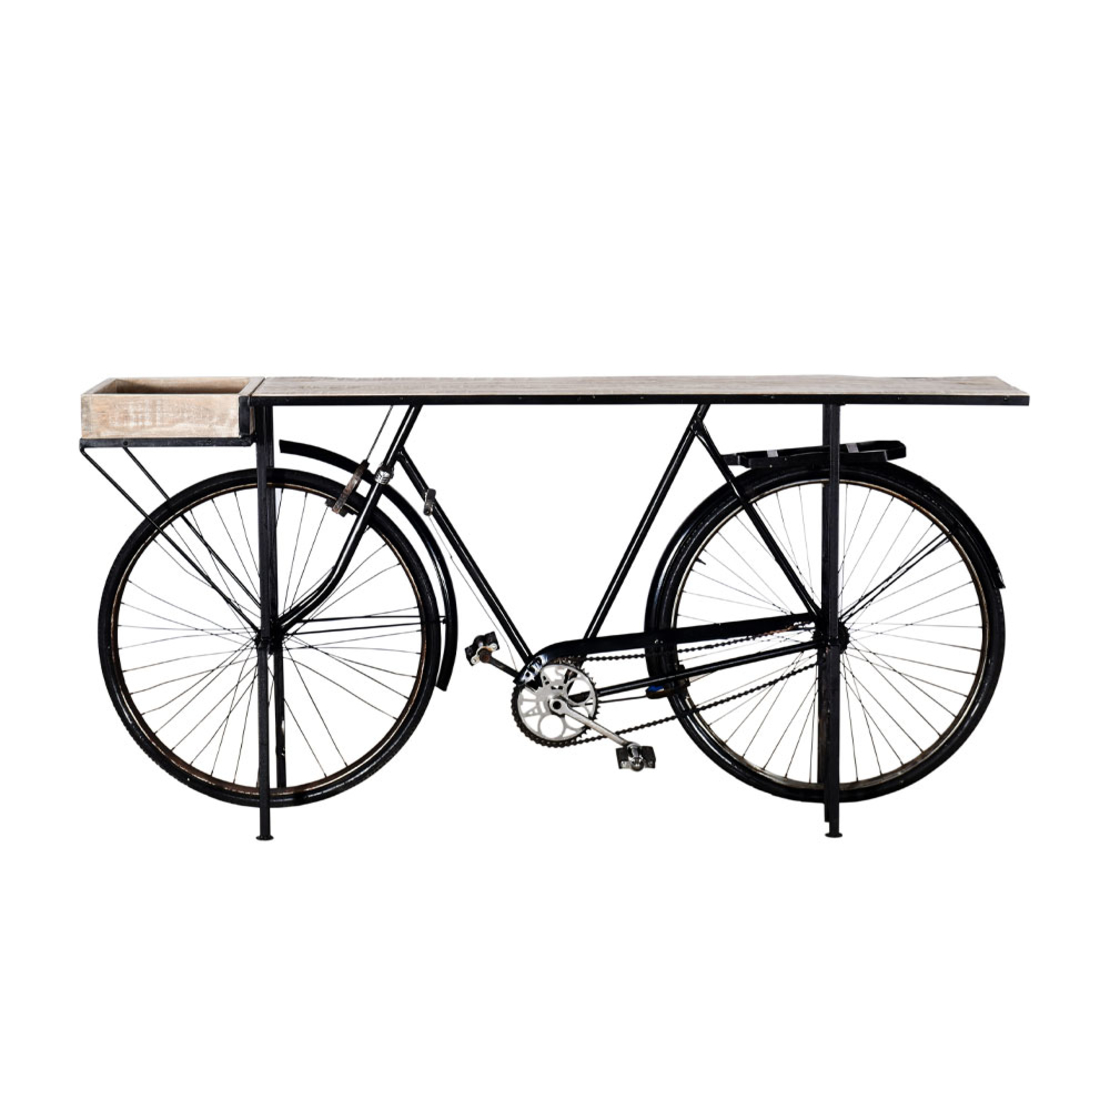 CYCLING CONSOLE METAL NATURAL BLACK 183x36xH84cm IN